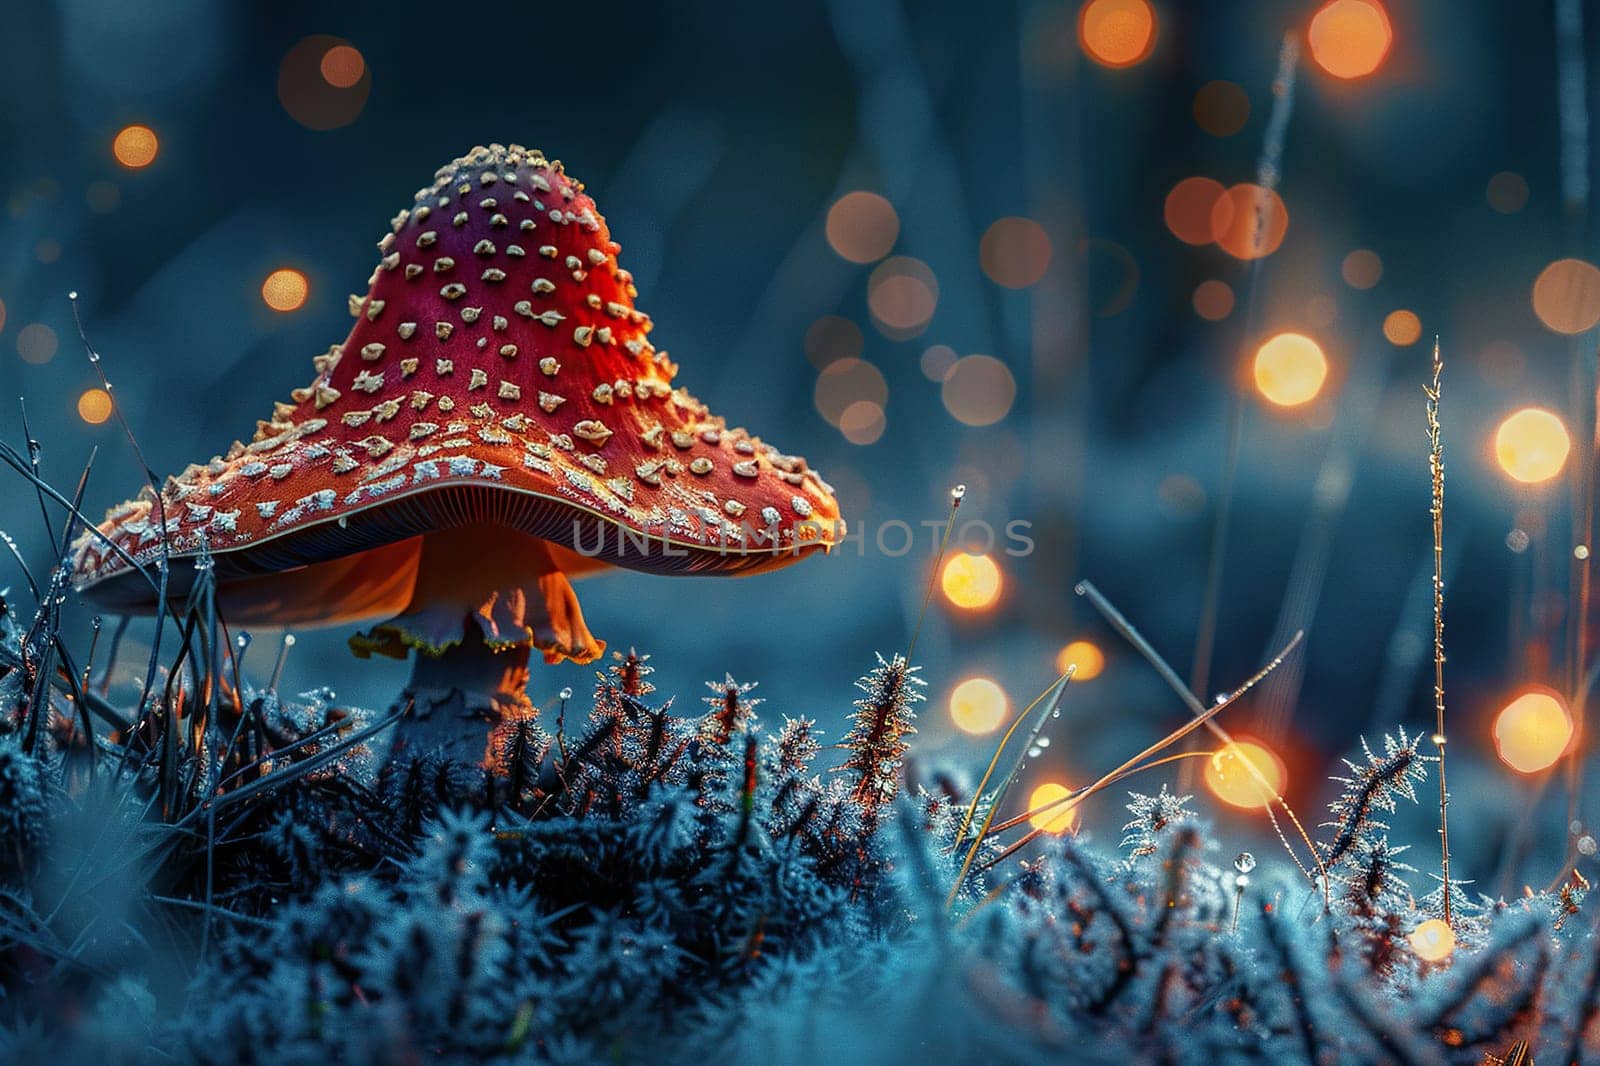 Fantasy fly agaric in mystery dark forest at night. Fly agaric against a background of golden bokeh.